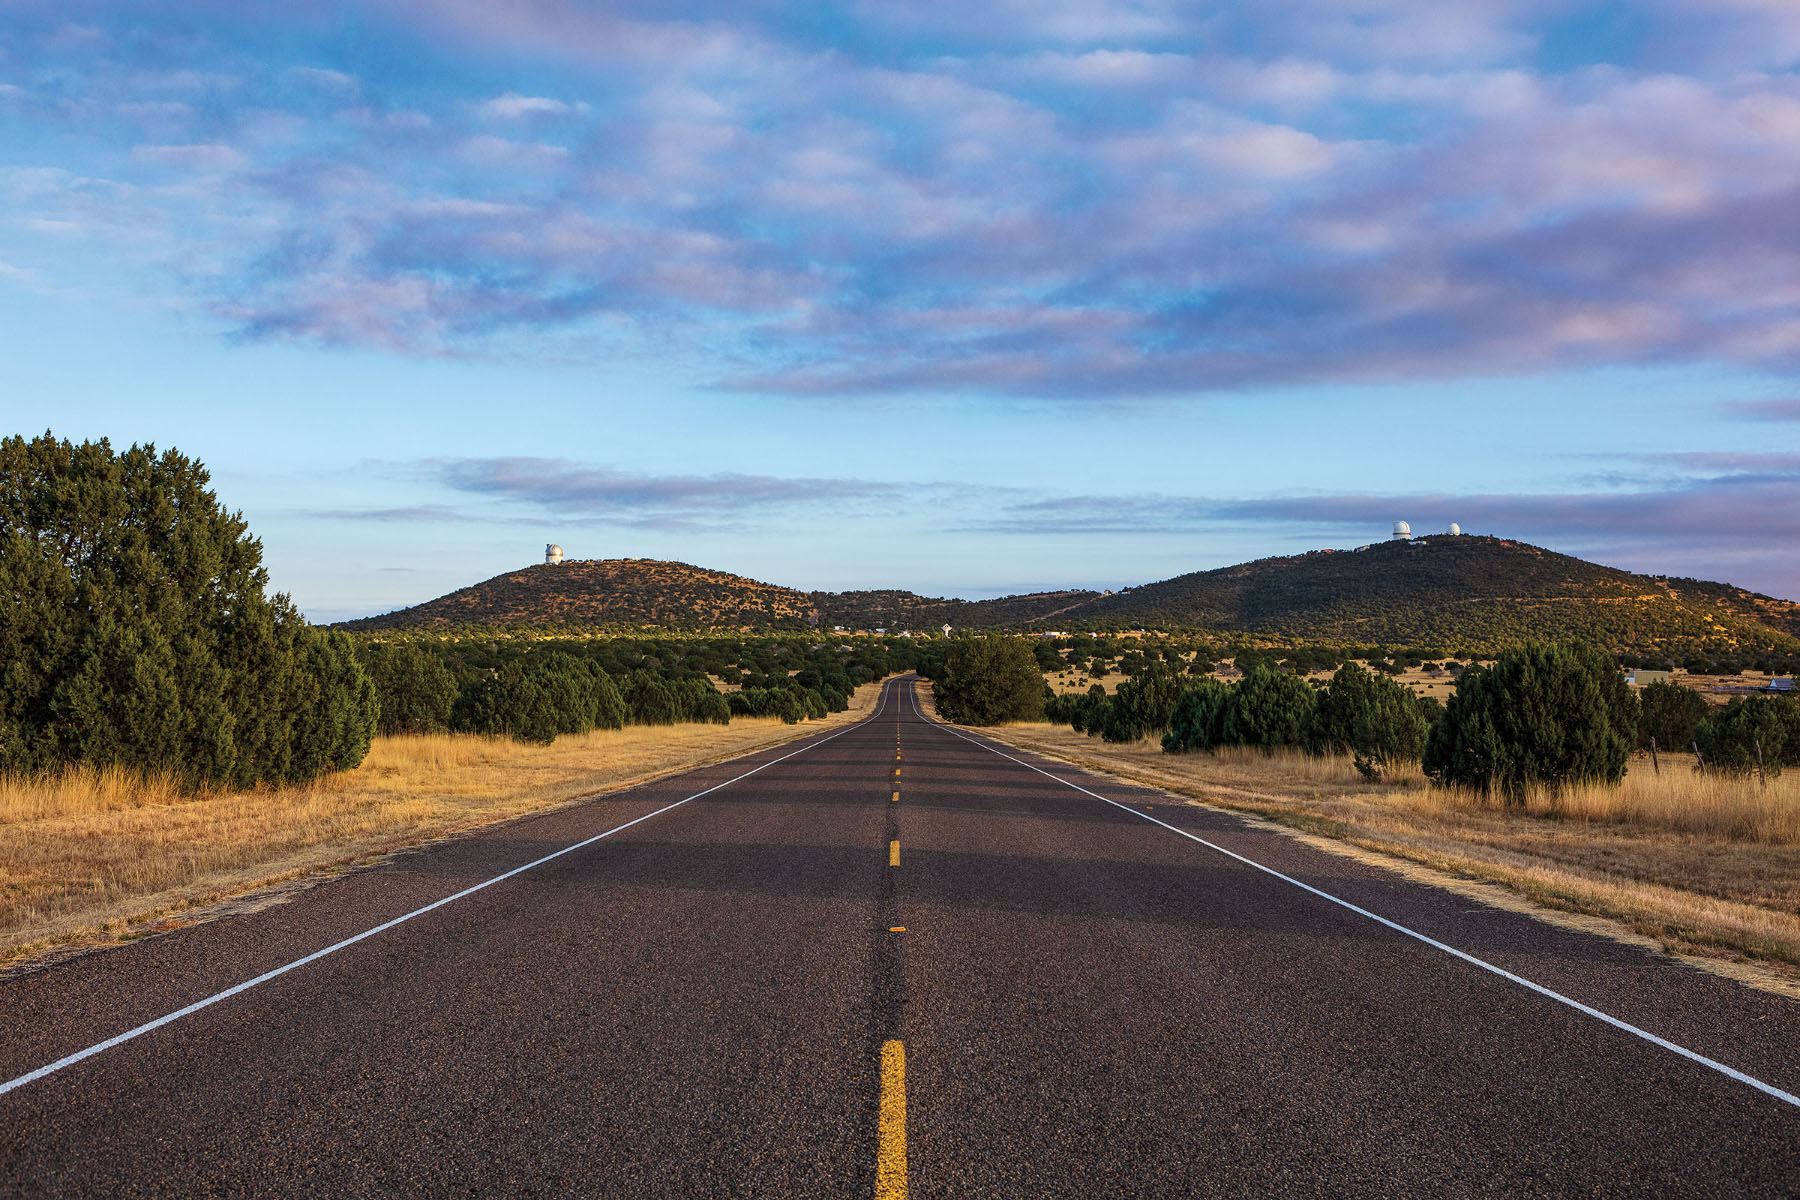 A photo of a wide open highway leading toward two mountains under a blue sky with clouds